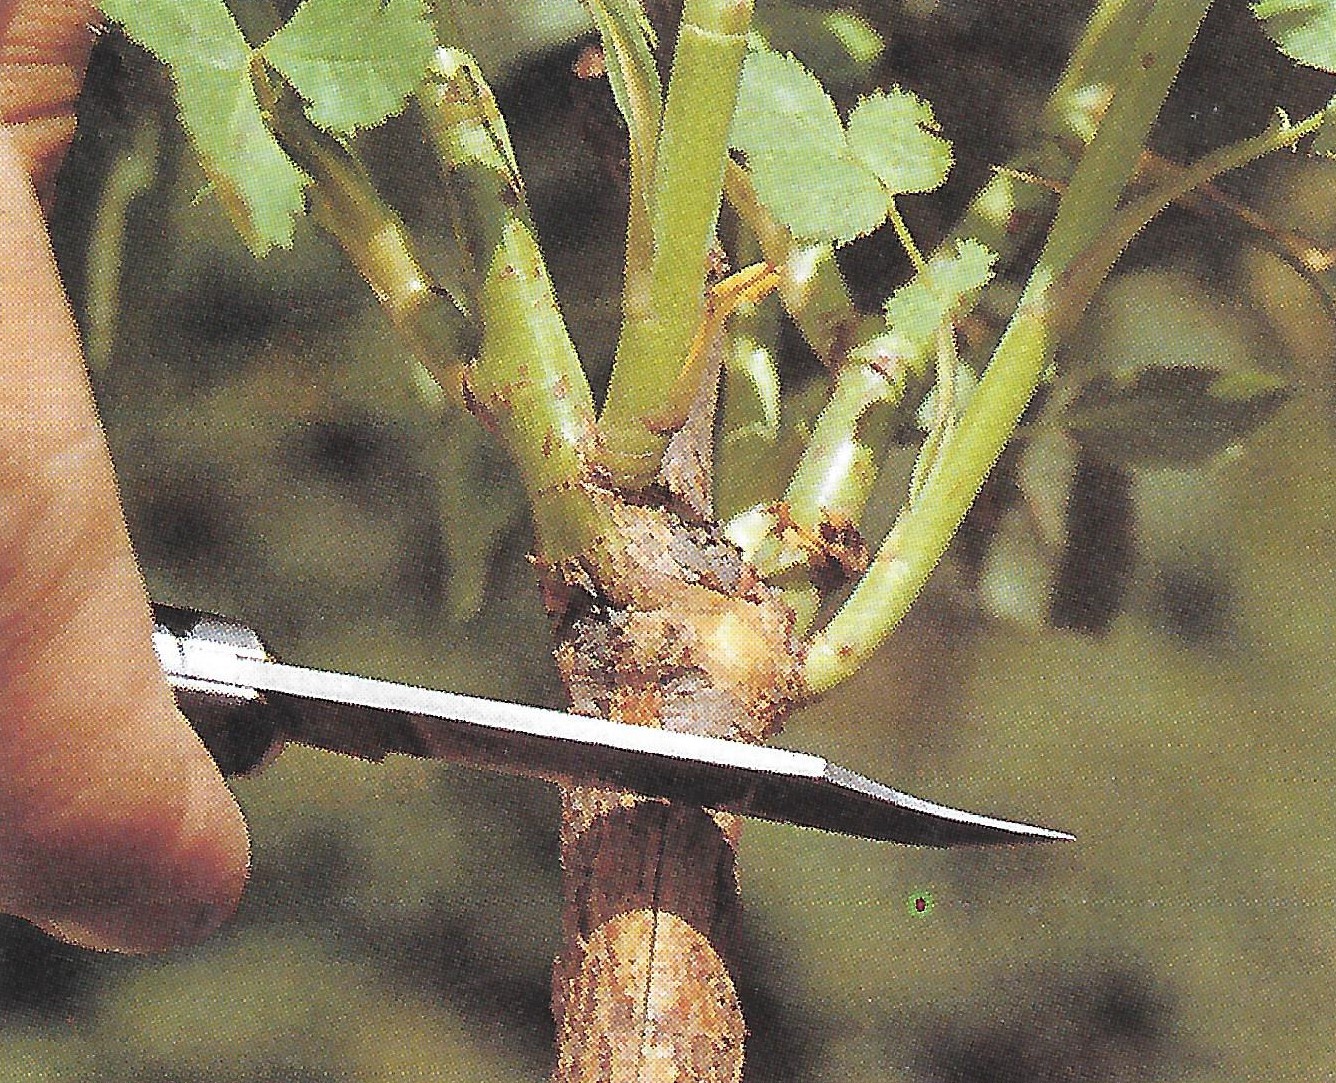 Step 4: Prepare the rootstock by cutting a T-shaped slit in the bark.